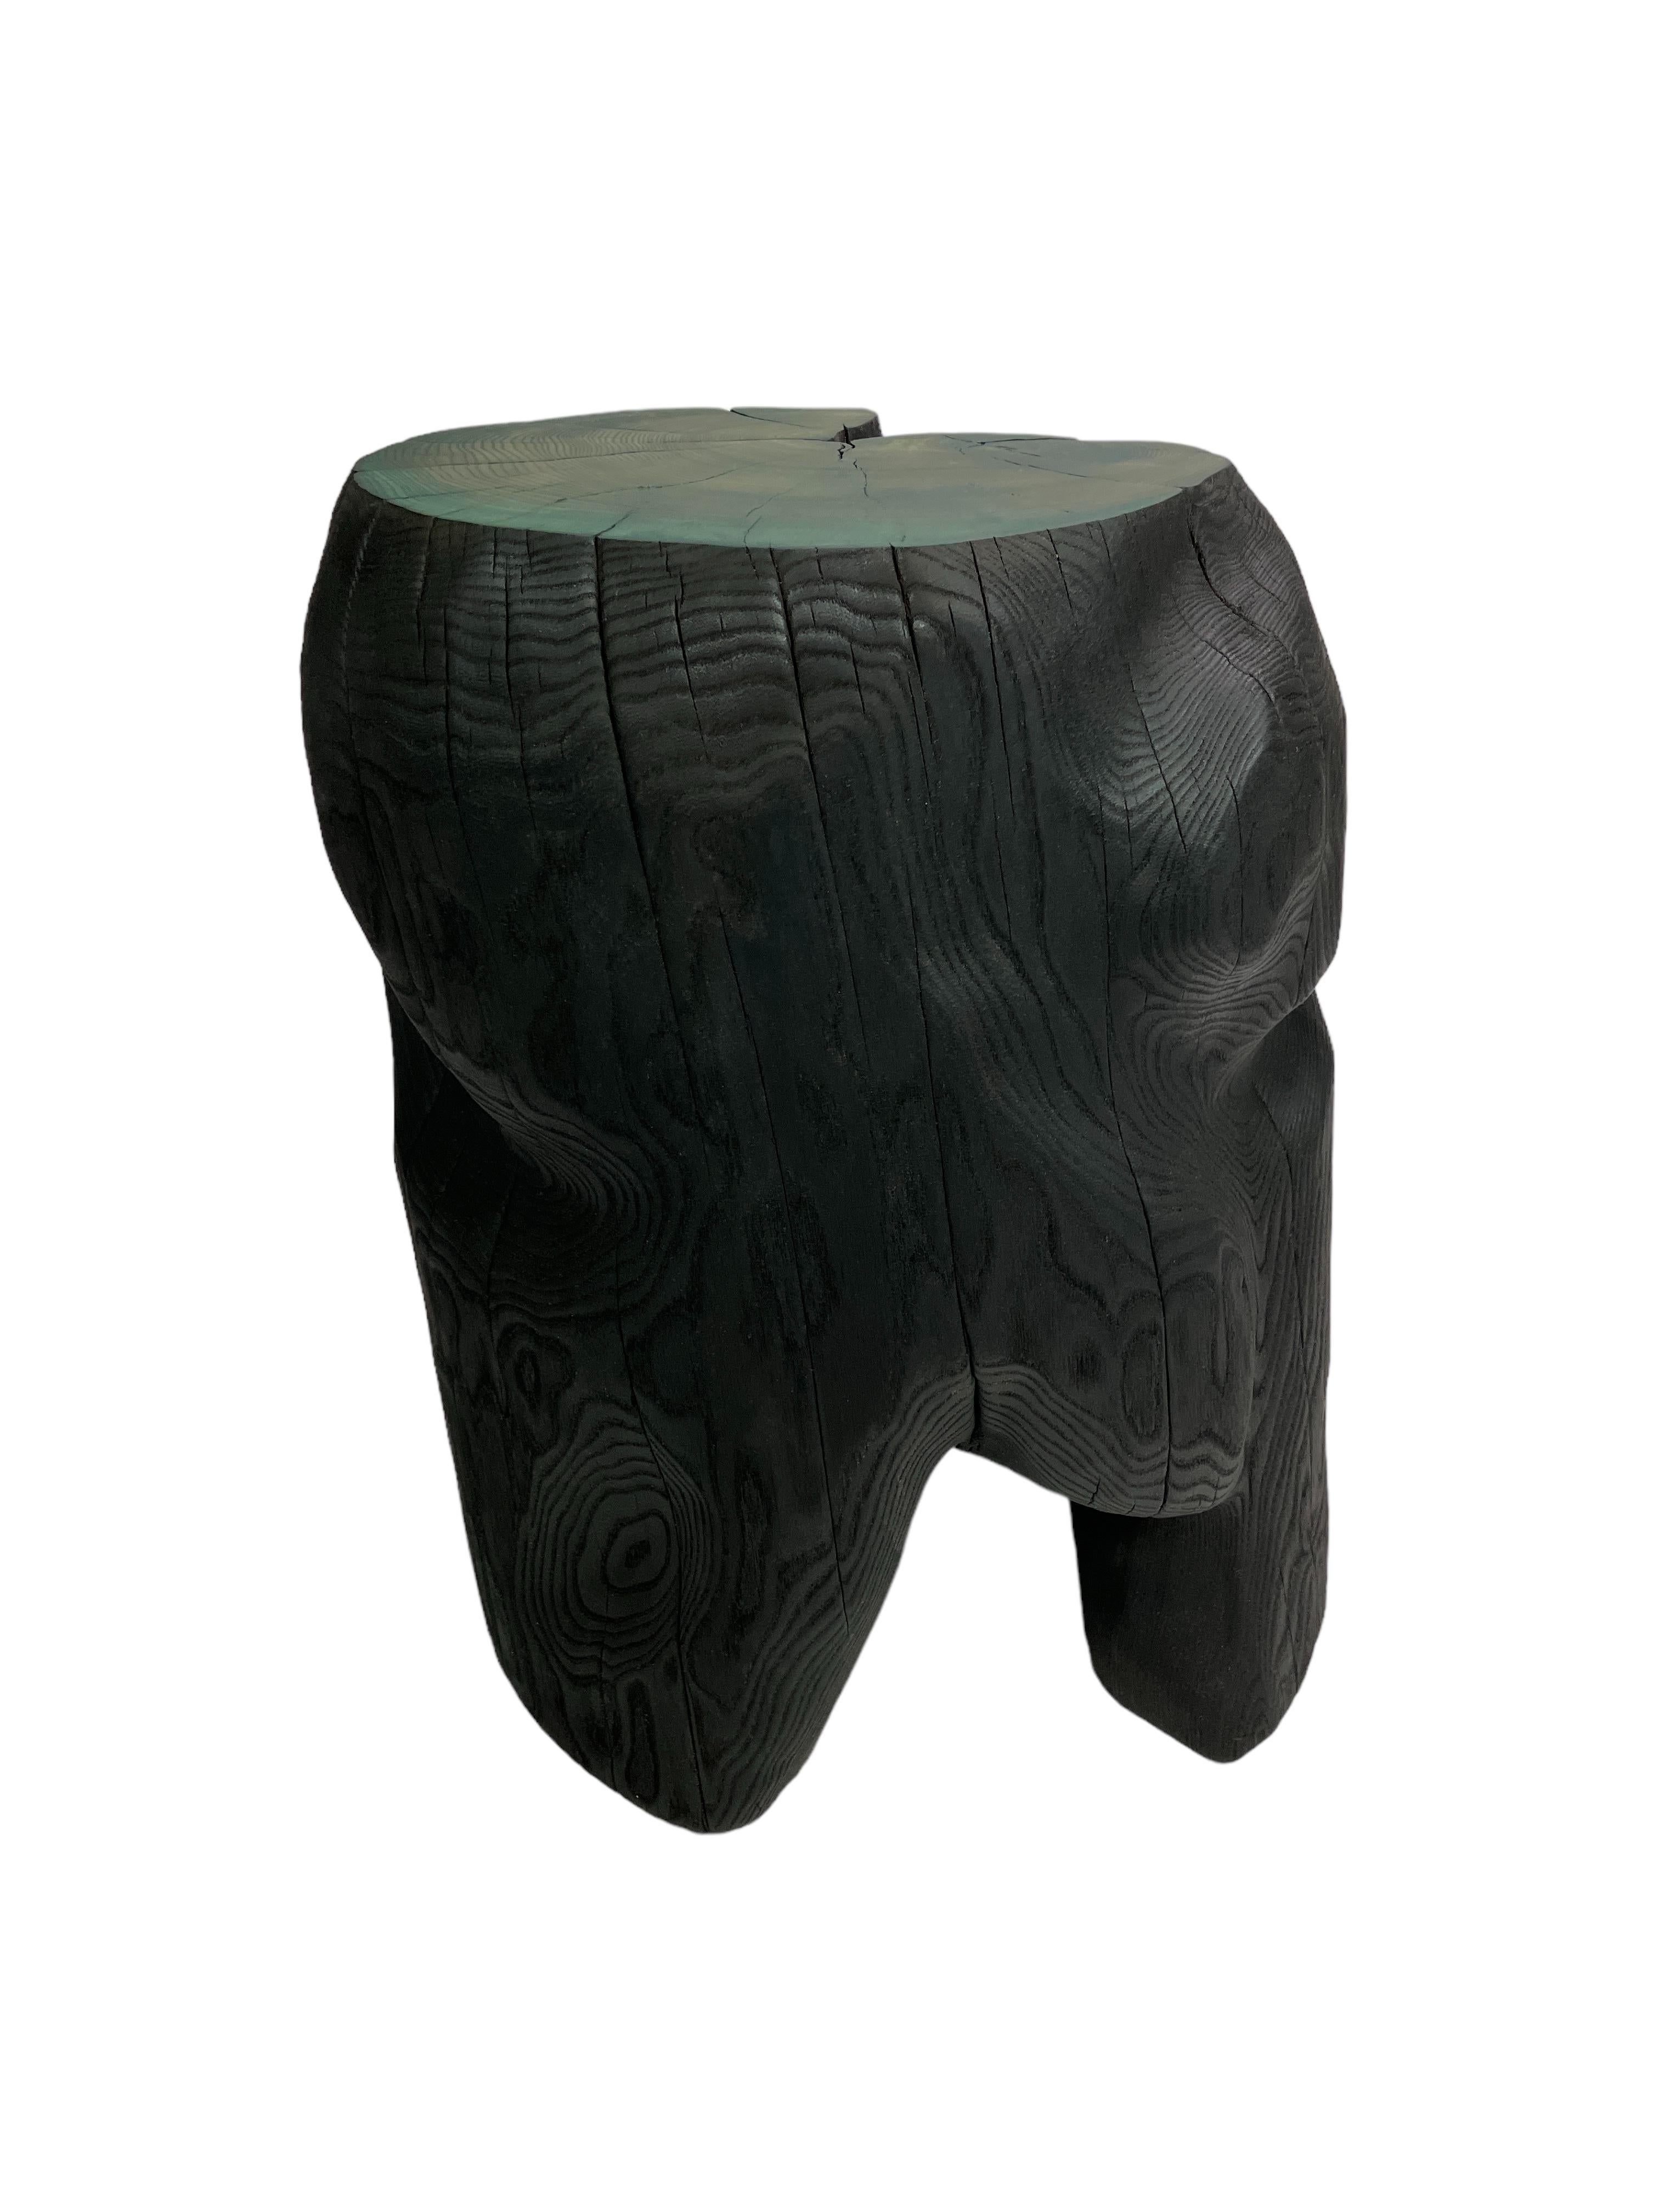 Carved sculptural contemporary wooden stool/table from locally sourced elmwood in Sweden. Hand carved by master Swedish woodmaker ELAKFORM. The organic form is charred and treated with linseed-oil. The top is finished with a green smooth surface